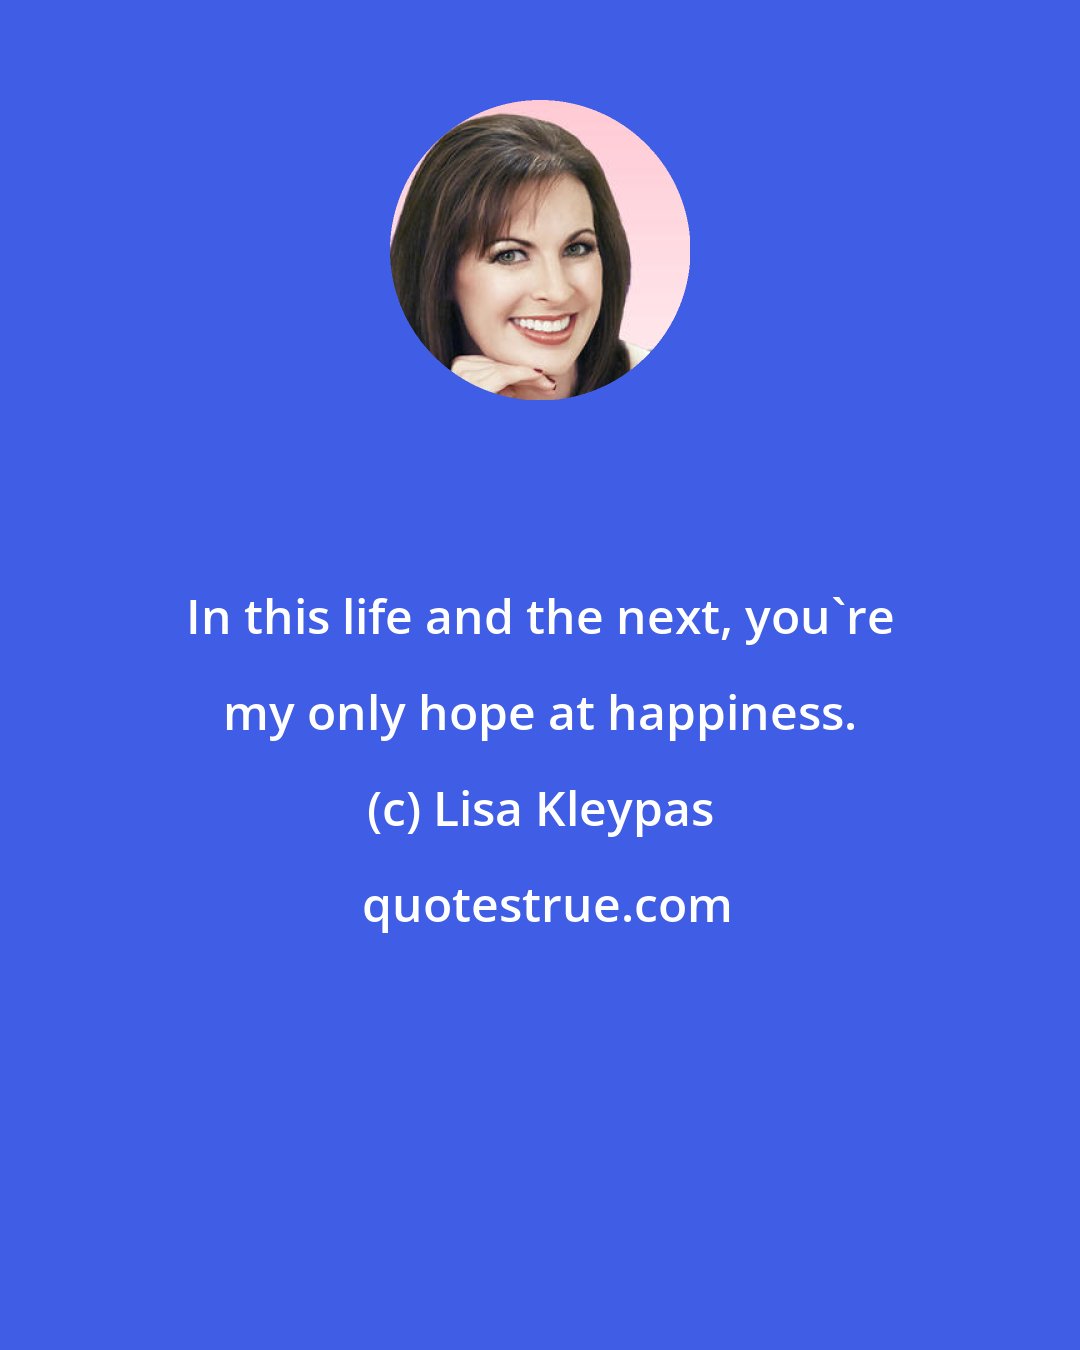 Lisa Kleypas: In this life and the next, you're my only hope at happiness.